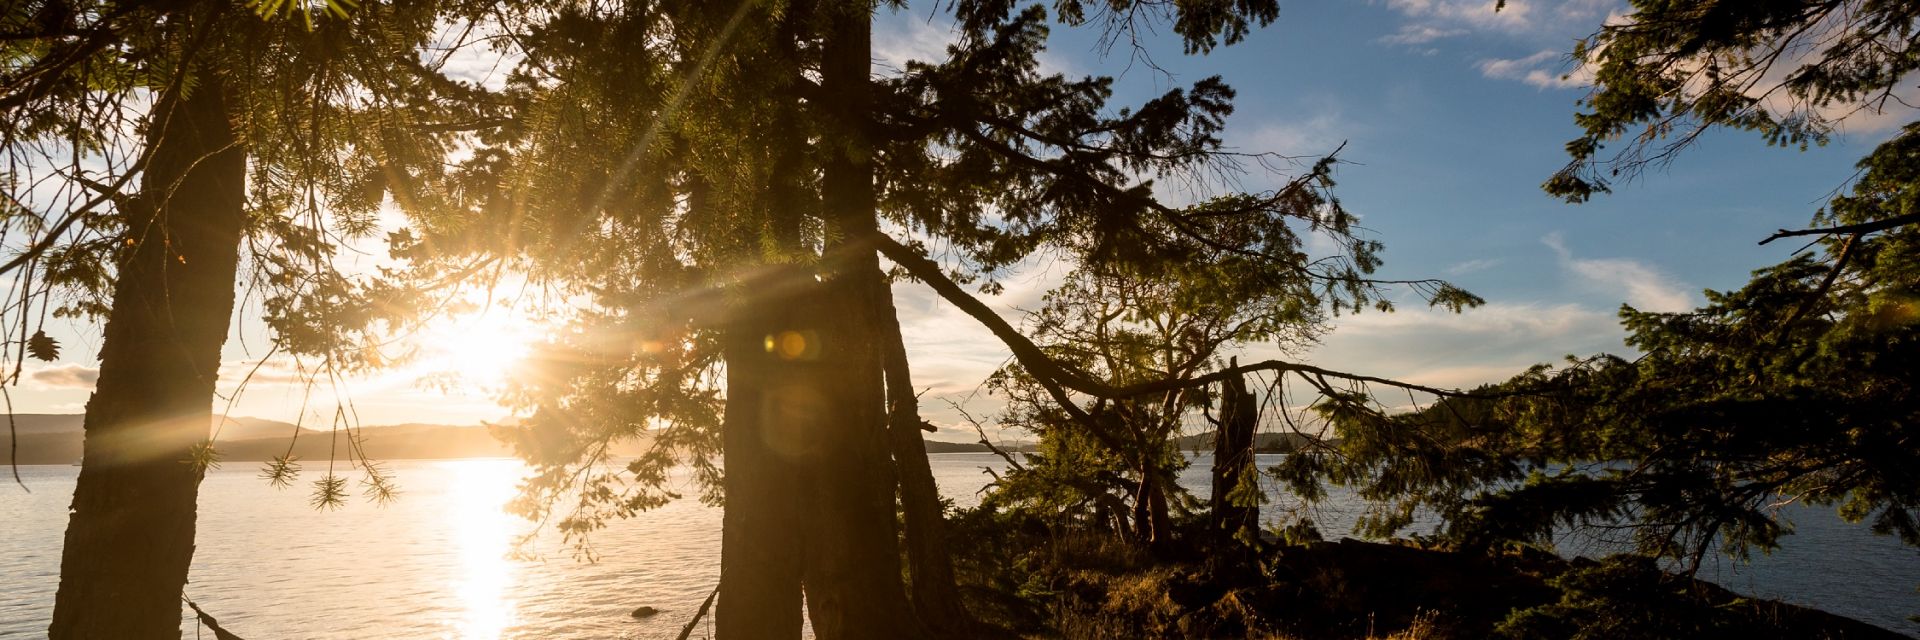 A person relaxing in a hammock amongst the trees watching the sunset on Pender Island